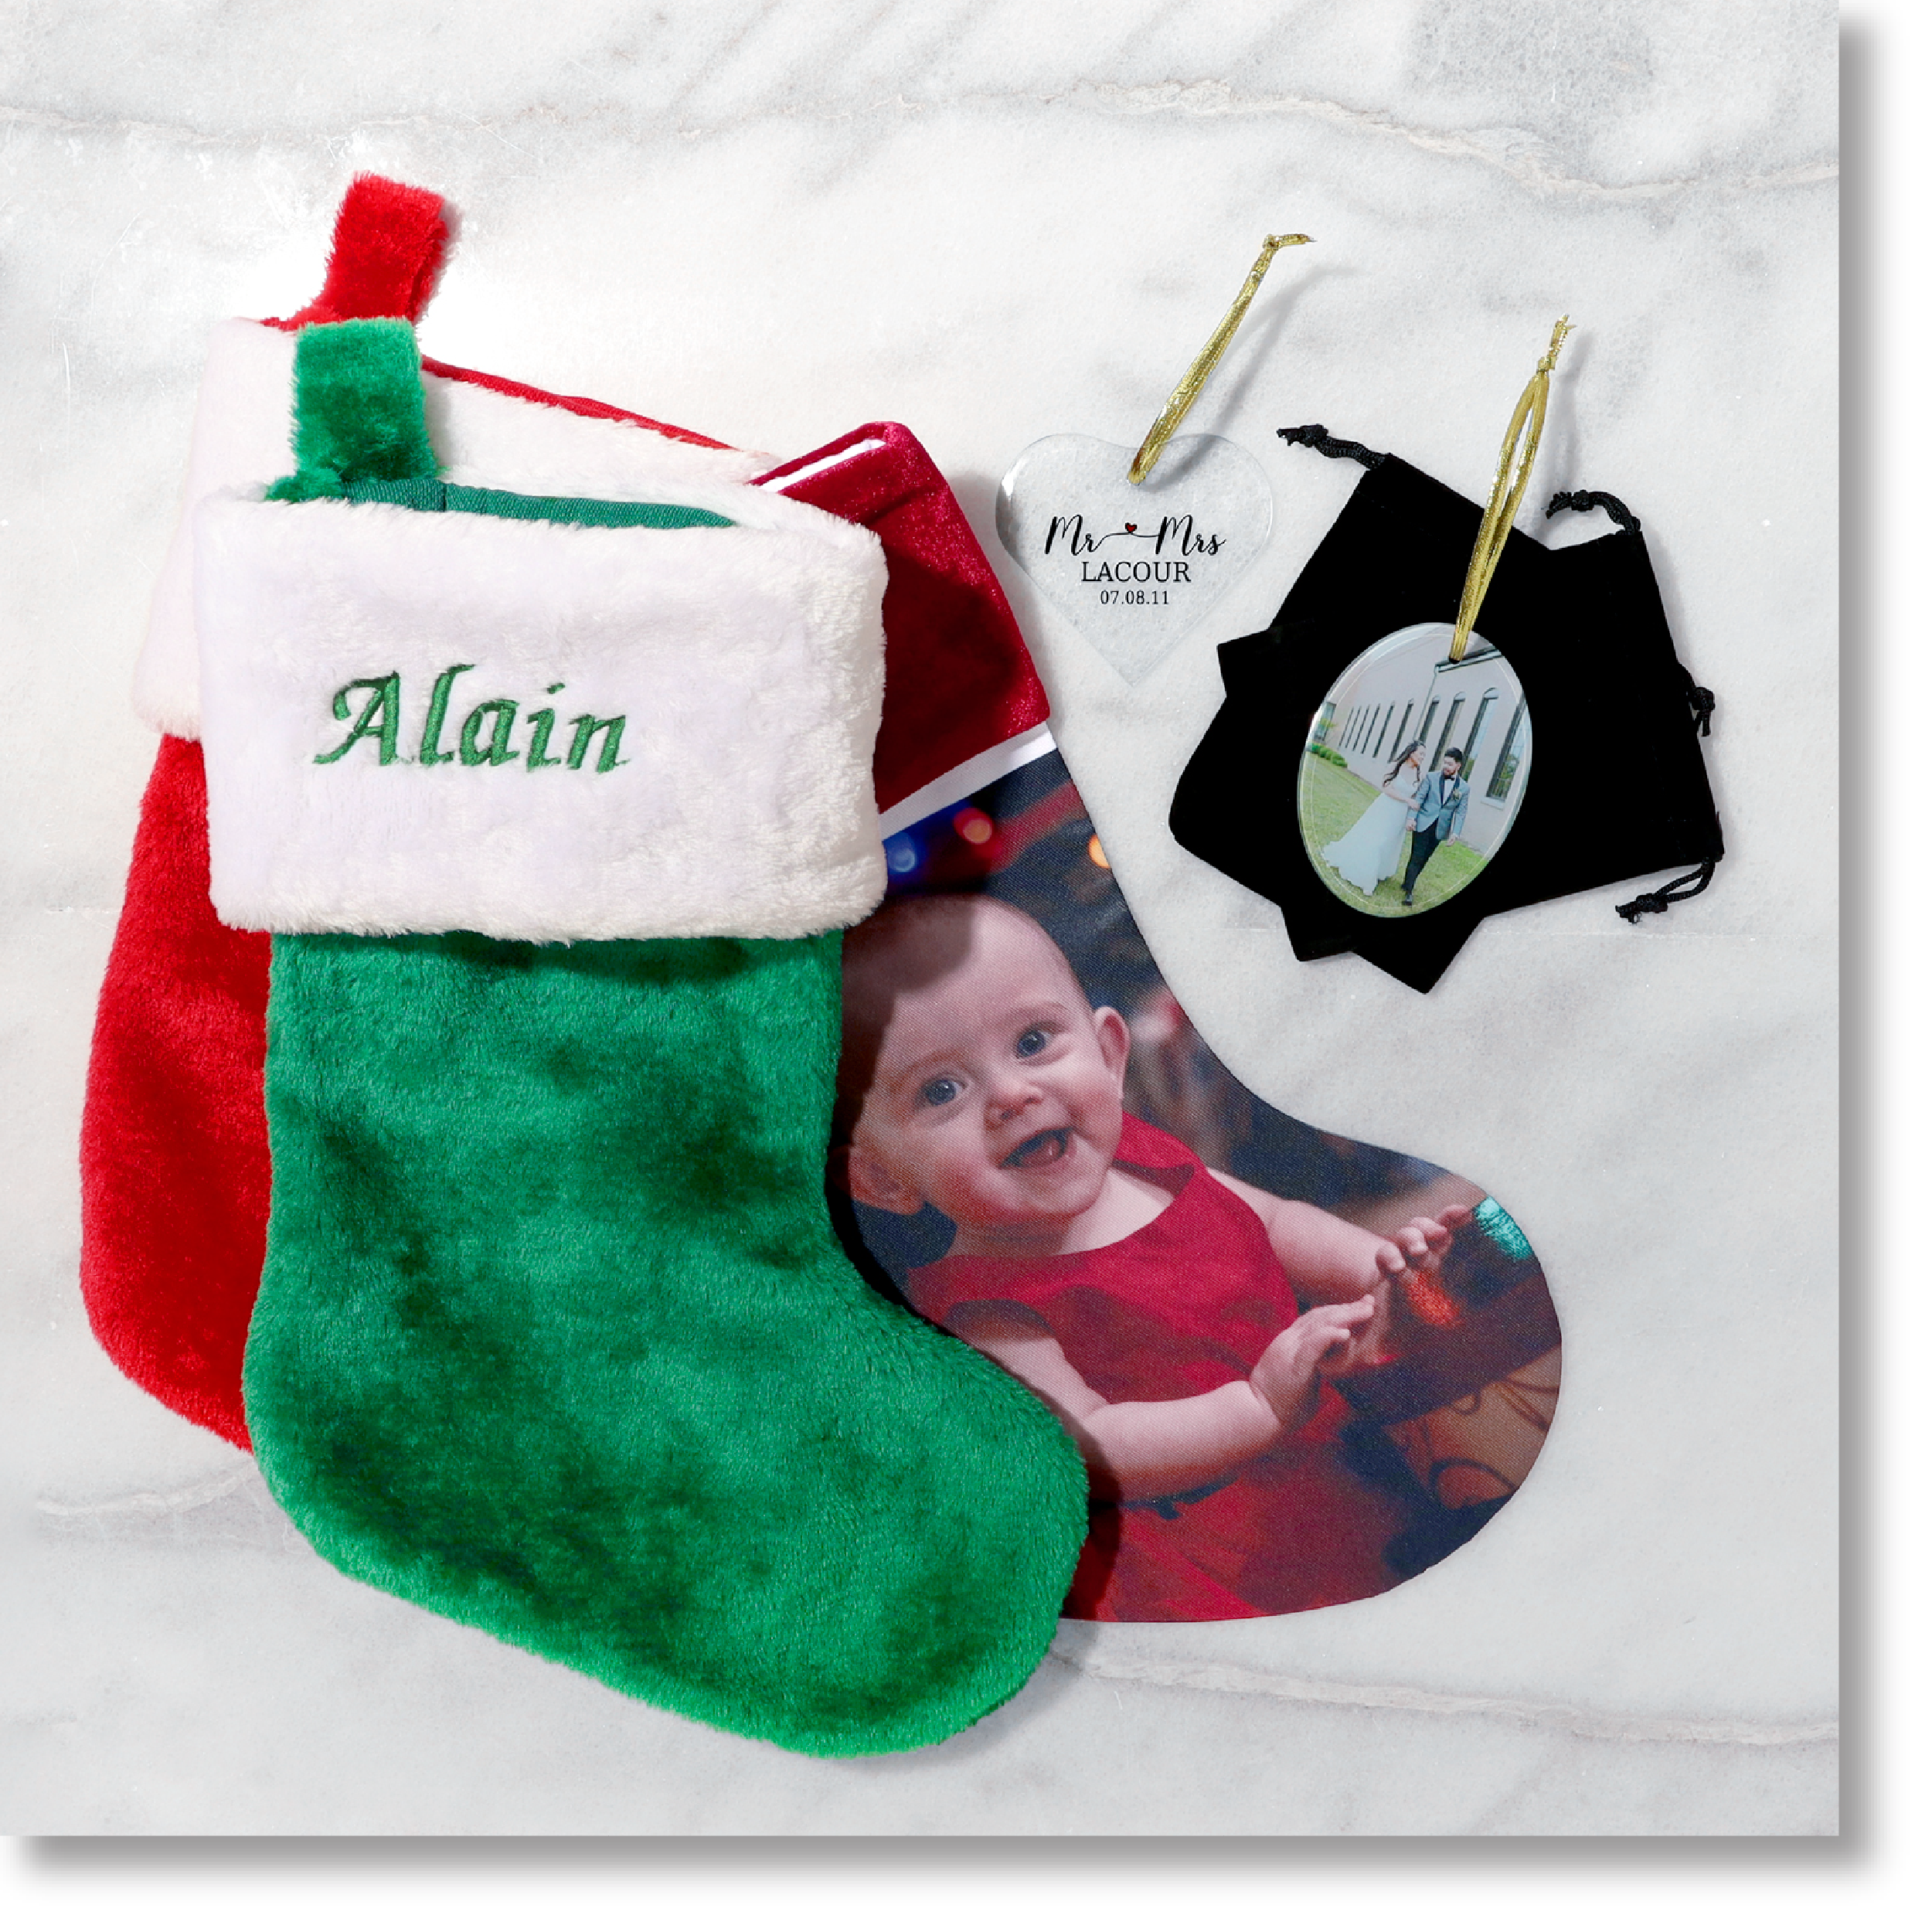 Customize Personalized Ornaments, Stockings & Festive Holiday Decor More